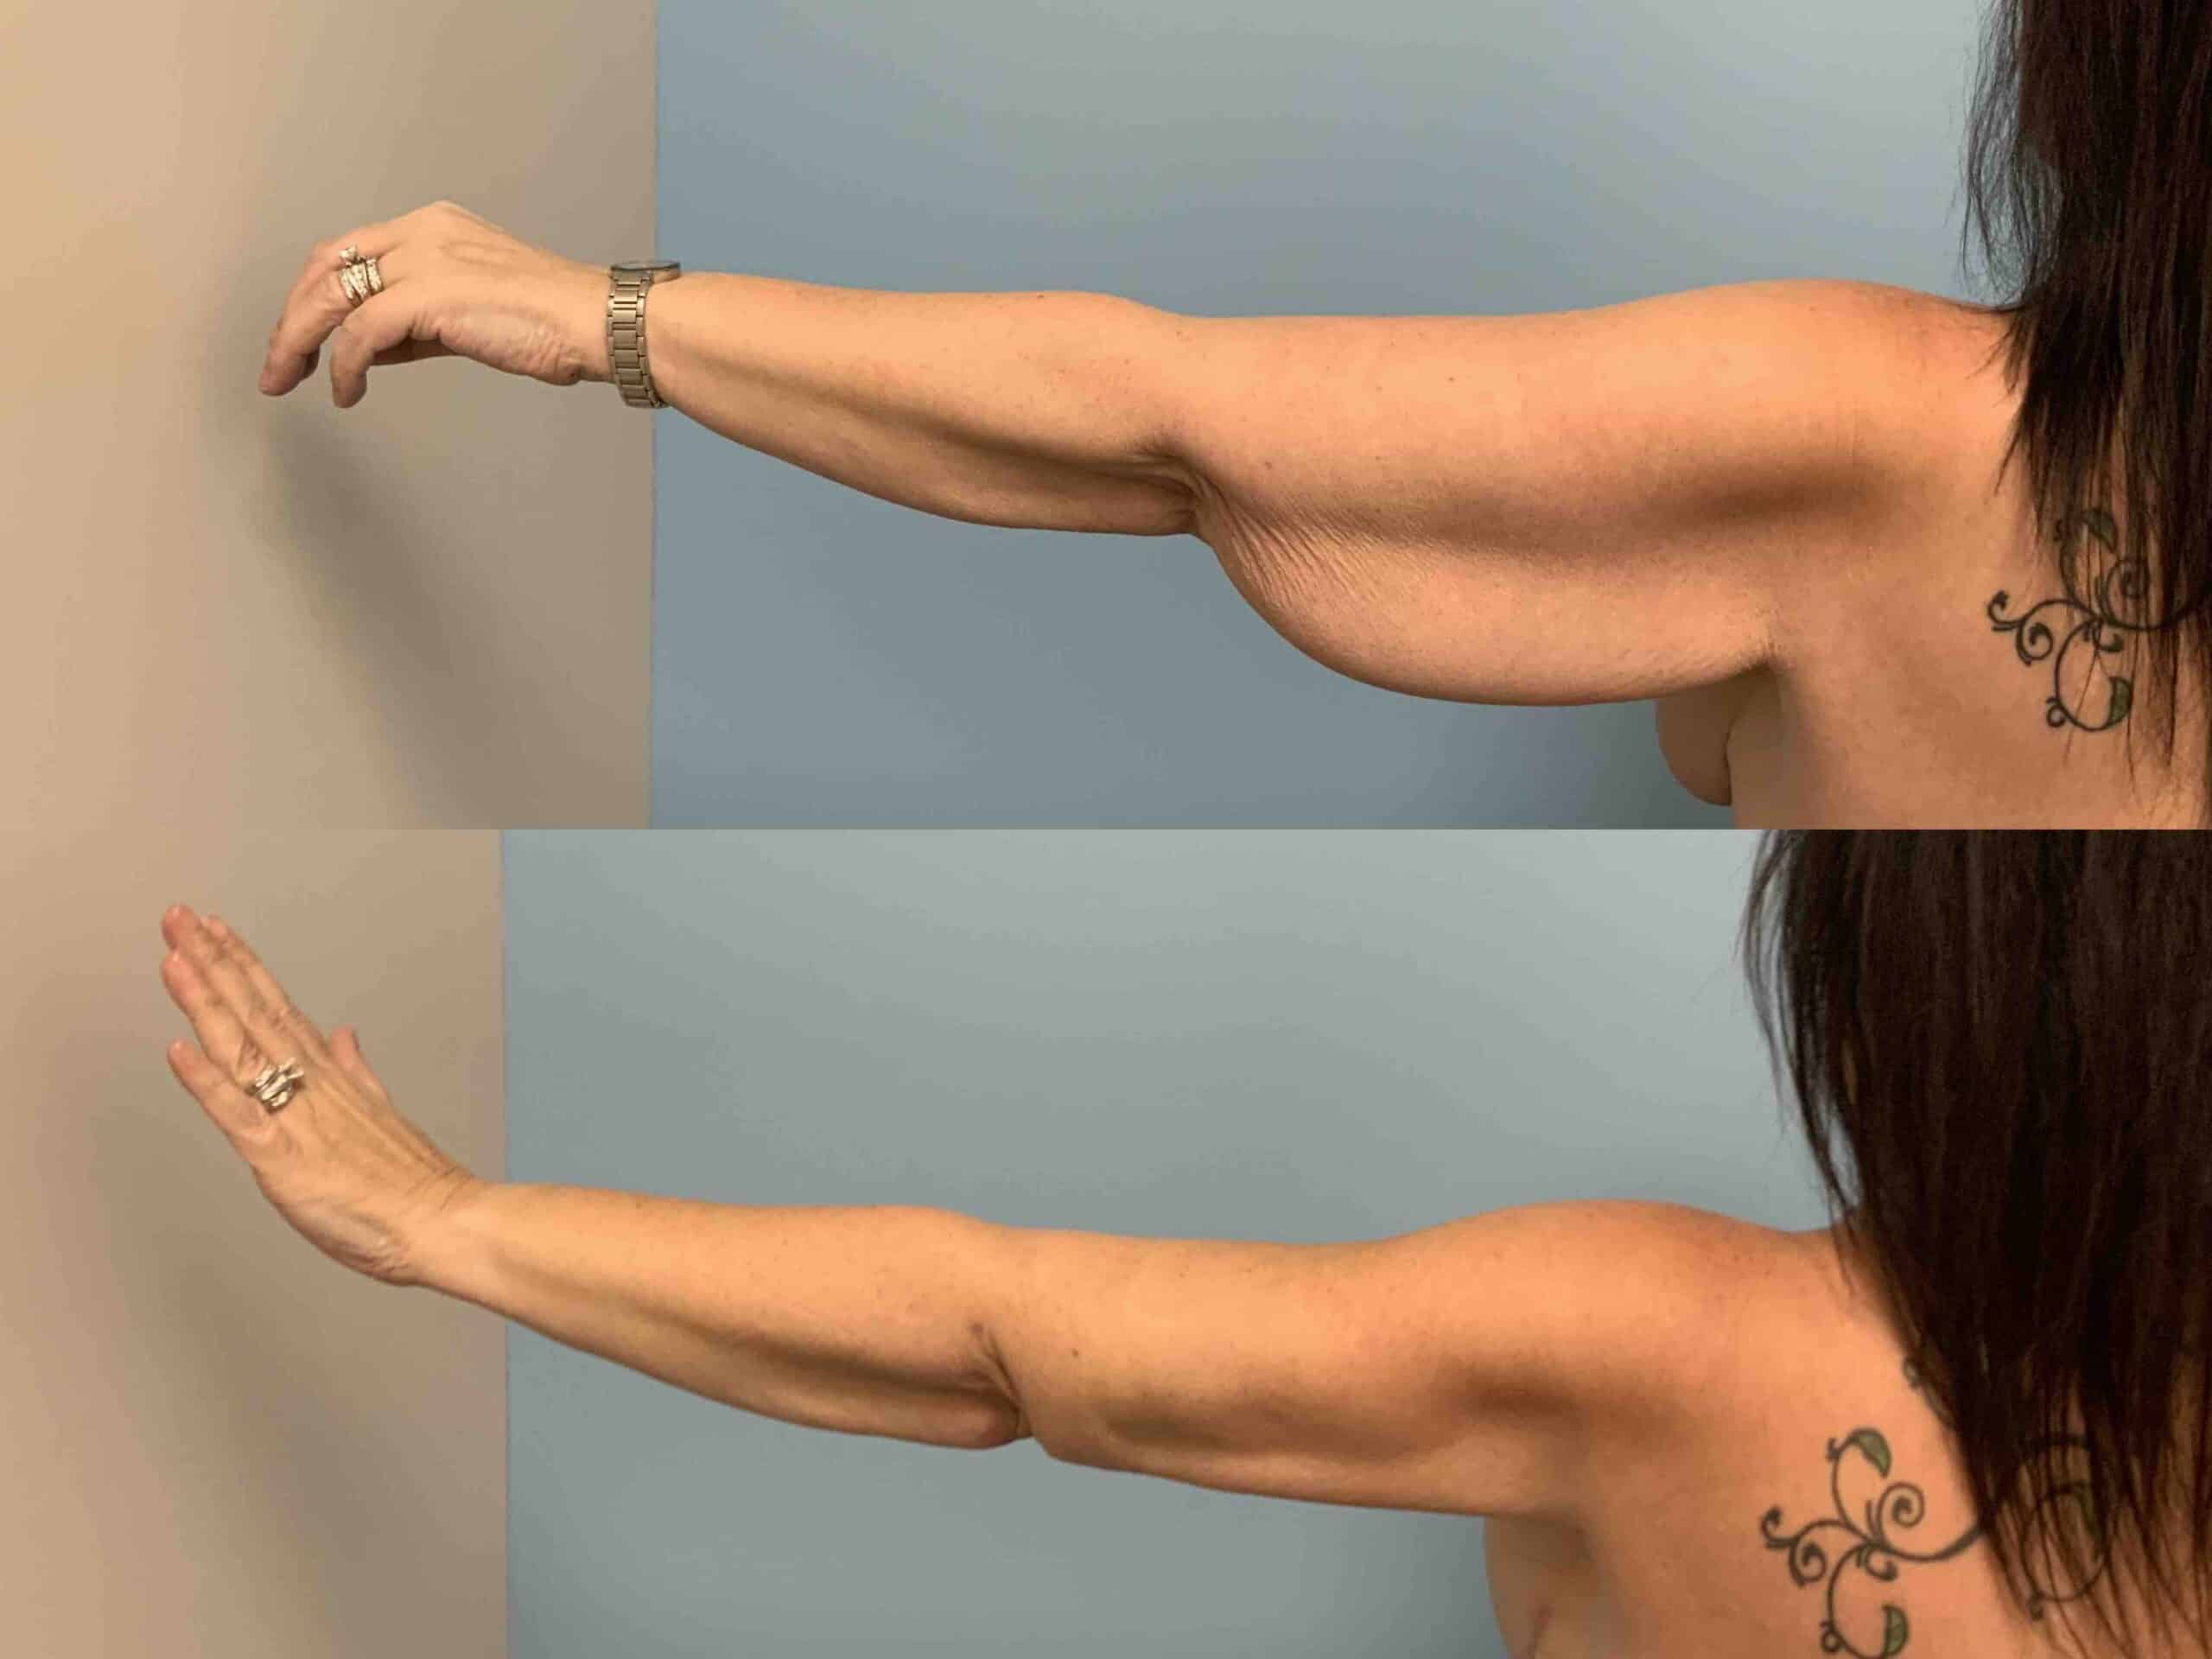 Before and after, 3 mo post op from brachioplasty VASER arms performed by Dr. Paul Vanek (straight arm, behind)